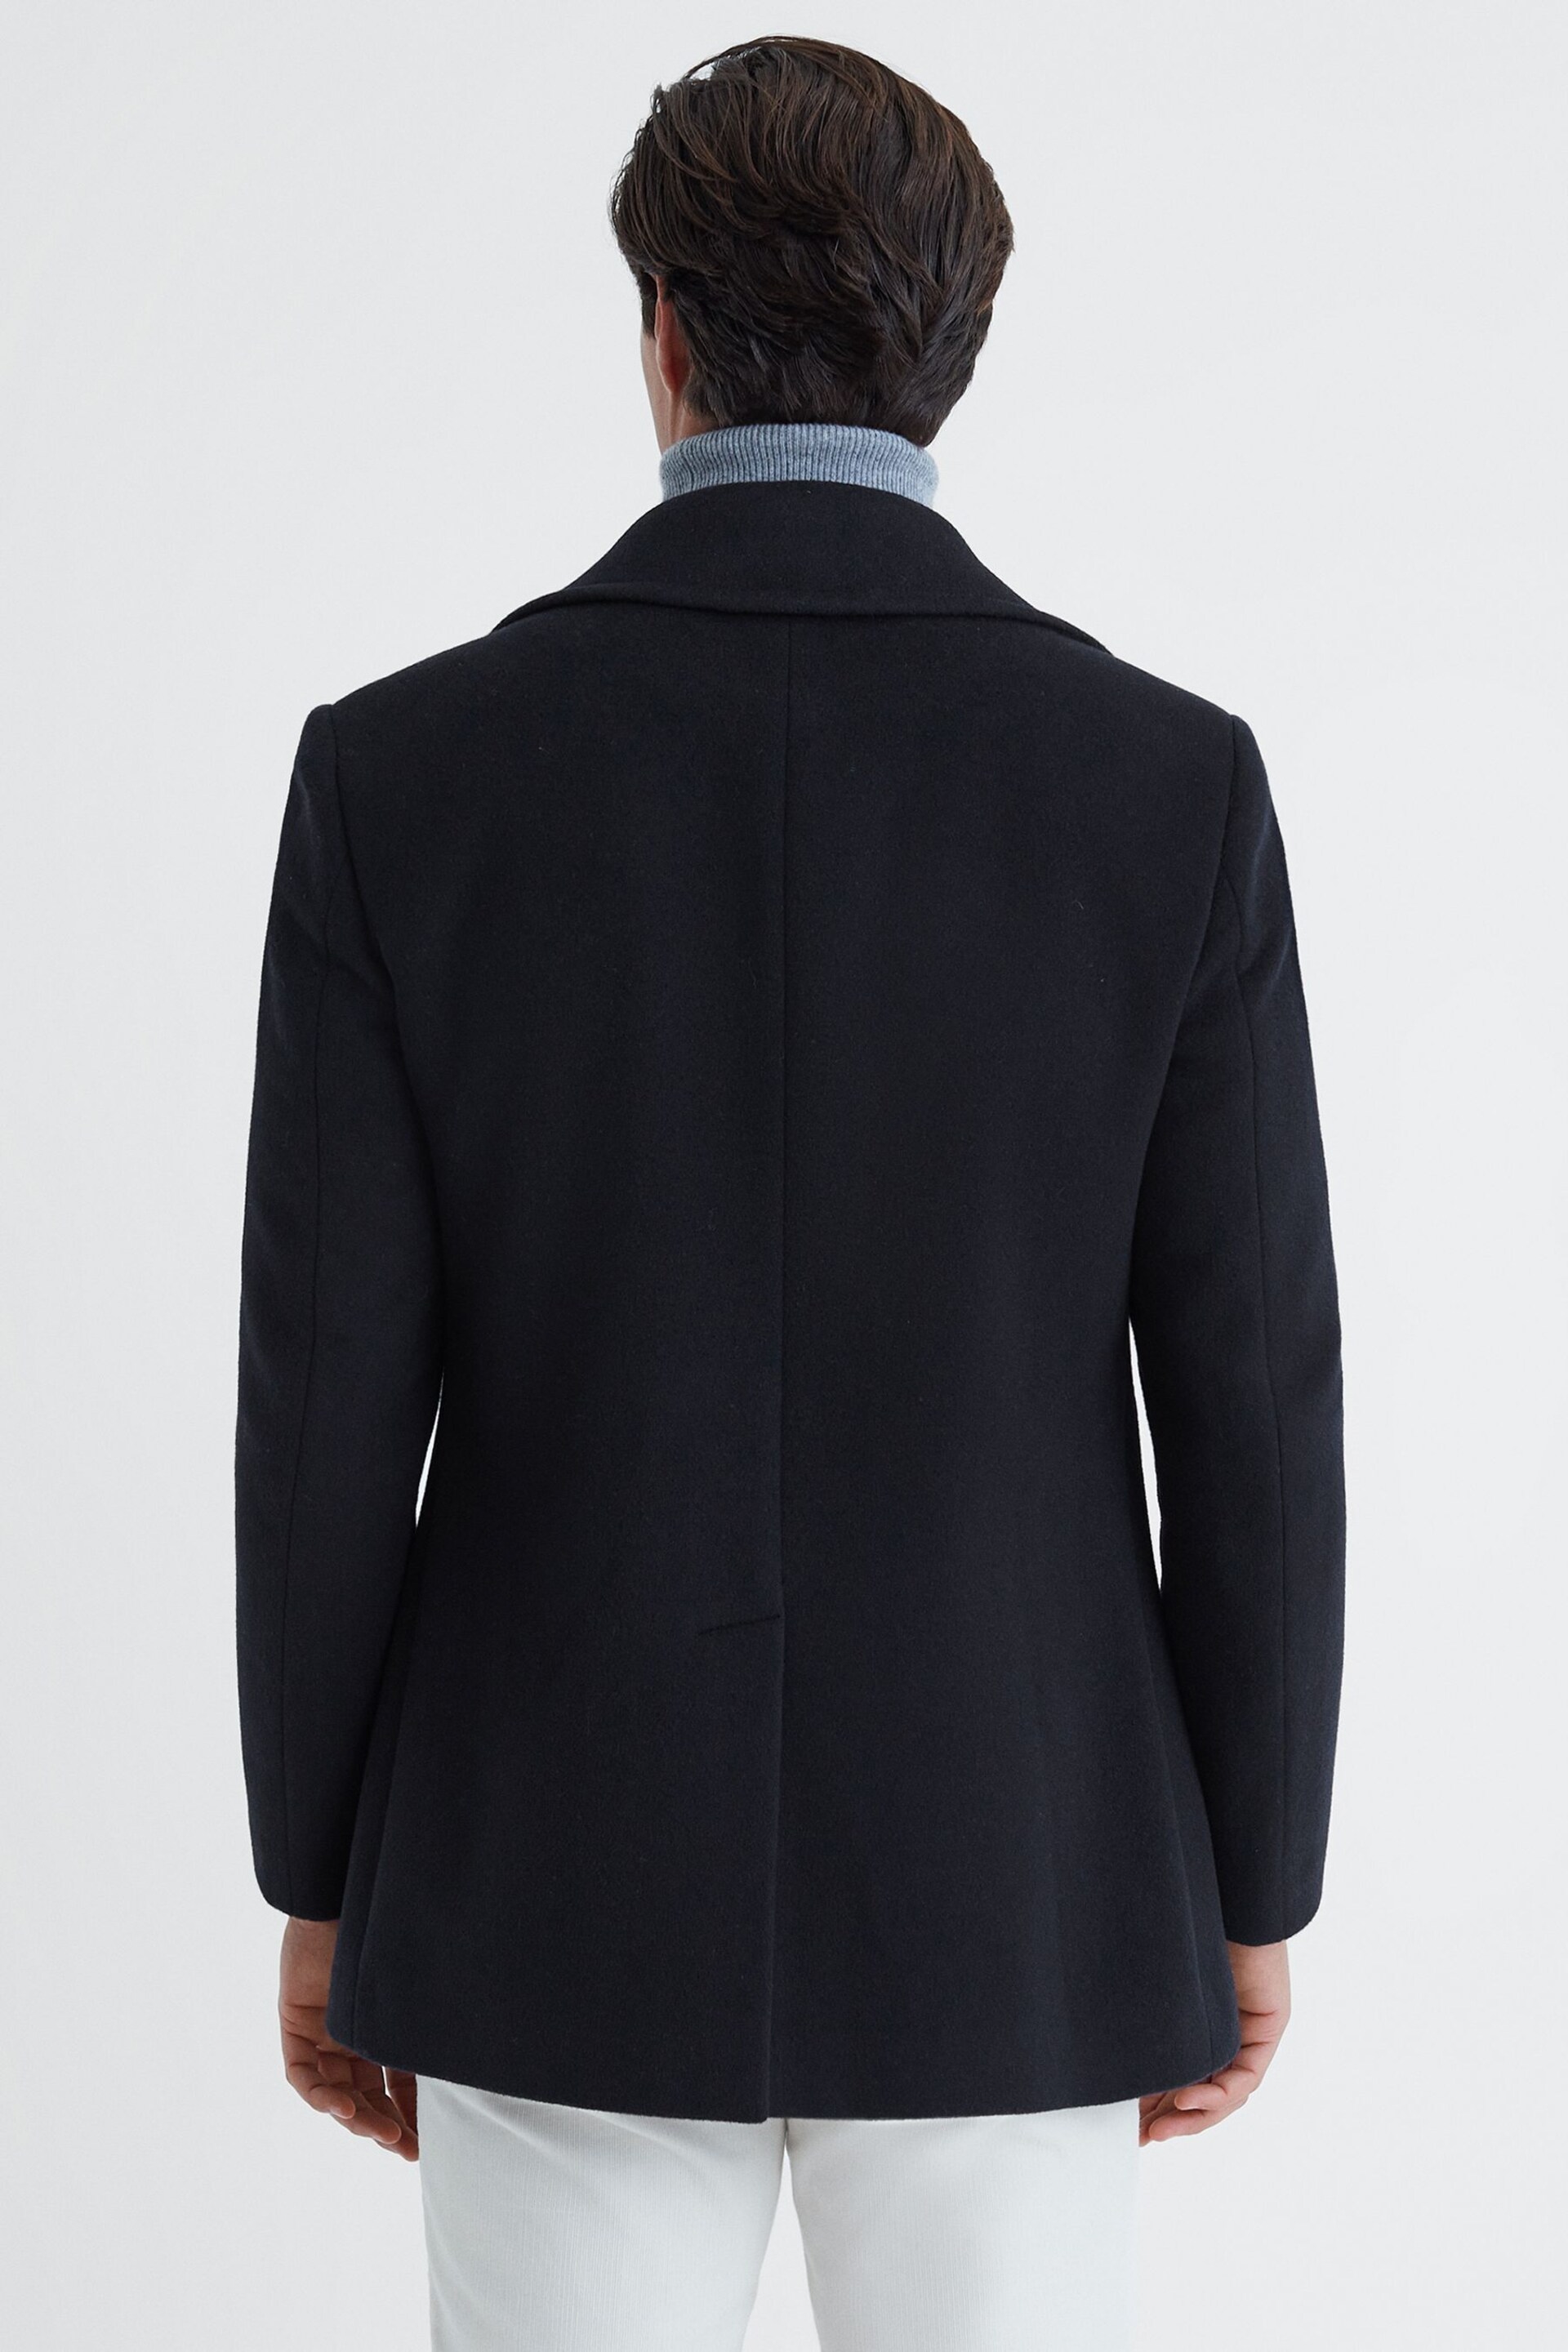 Reiss Light Navy Bergamo Wool Blend Double Breasted Peacoat - Image 5 of 6